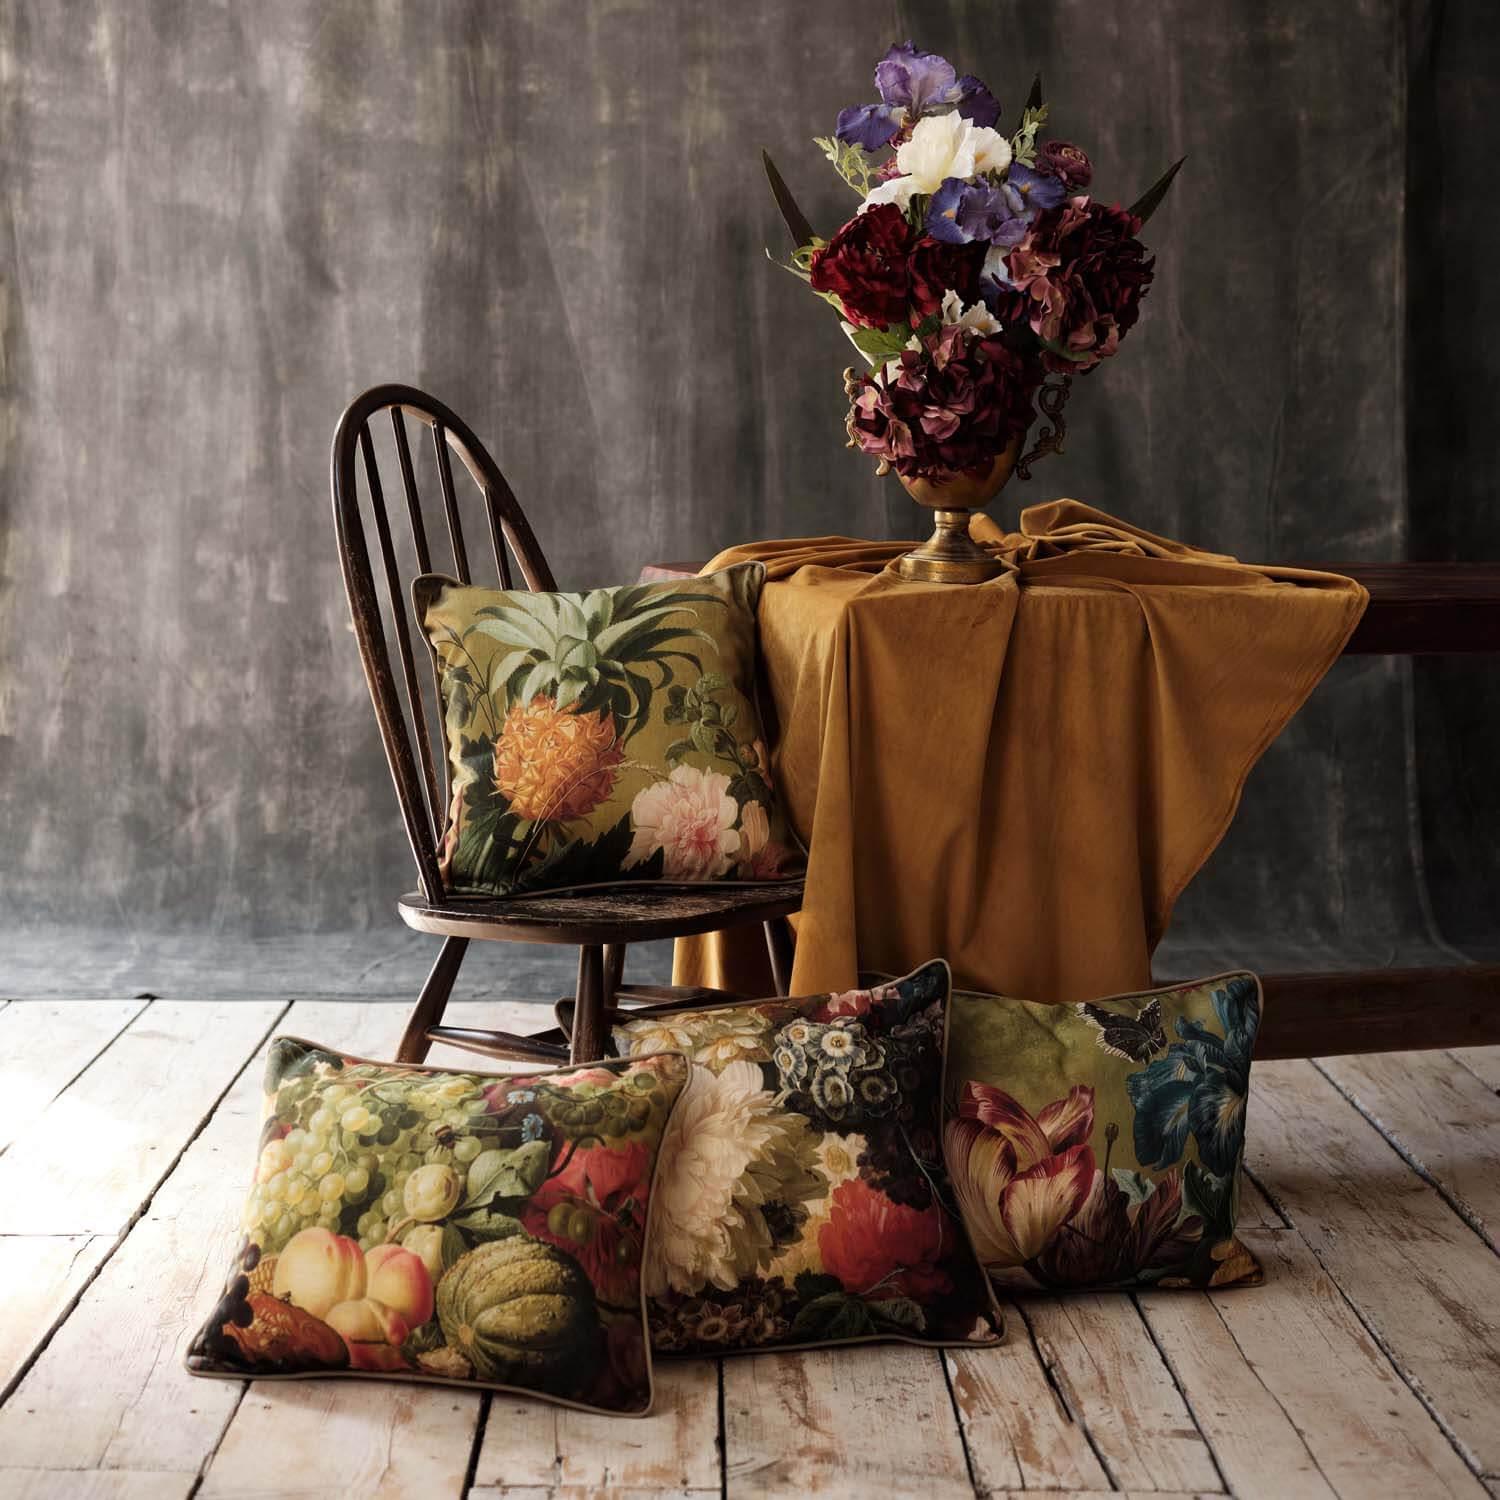 Luxe Van Brussel Fruit and Flowers In A Vase Peaches - National Gallery Cushion - Handmade Cushions UK - WeLoveCushions